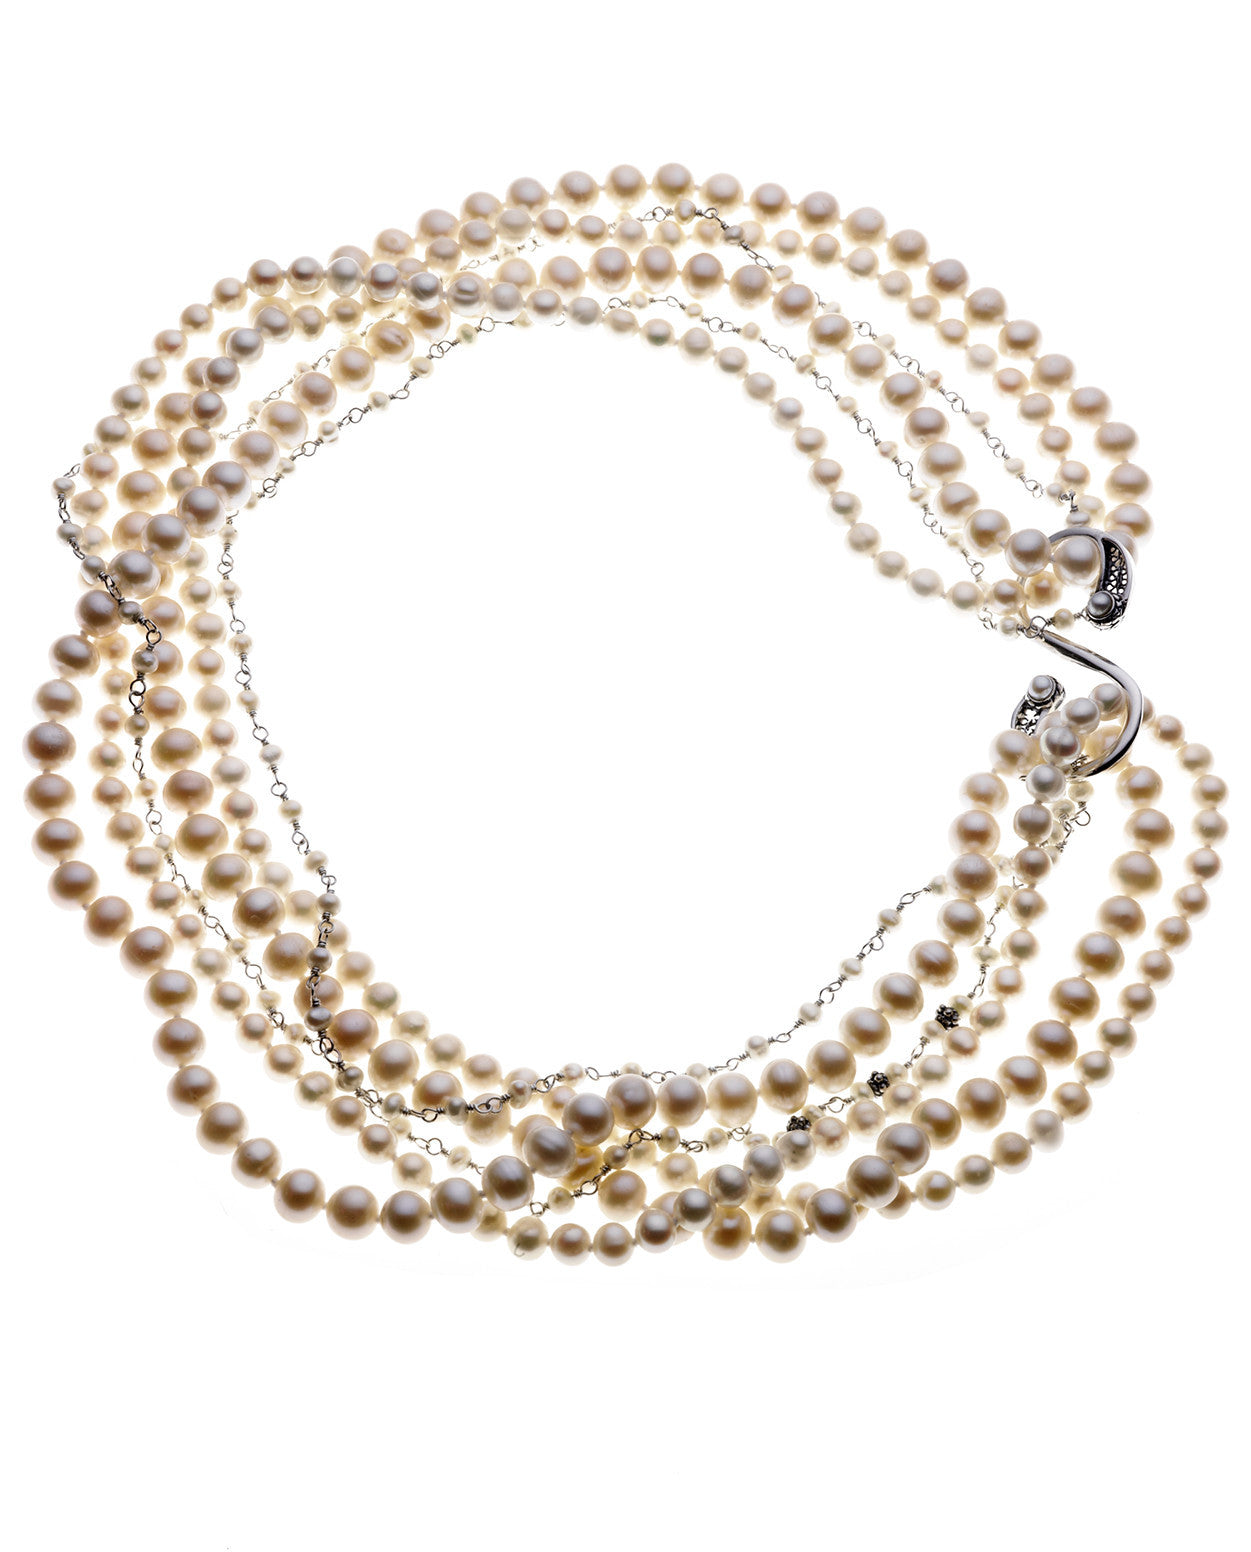 Artknots Madame Butterfly Sterling Silver White Pearl Necklace - Cynthia Gale New York Jewelry